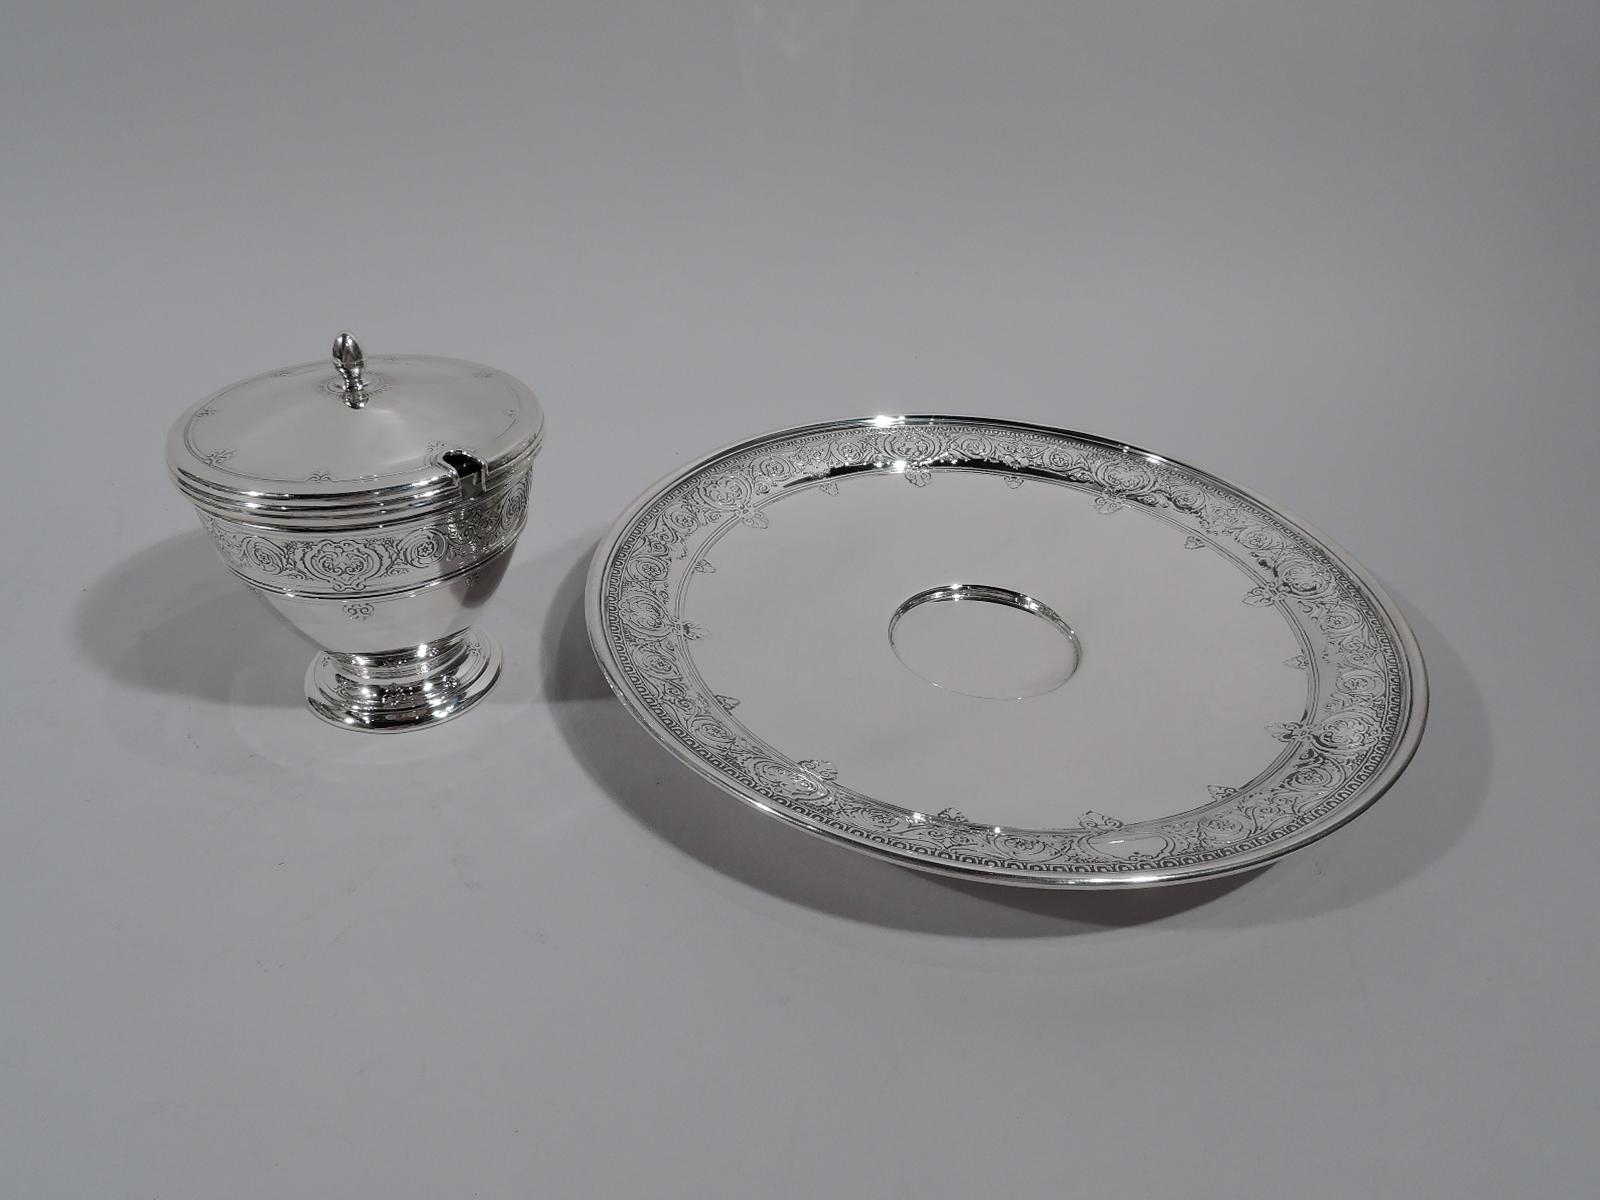 Edwardian classical sterling silver chip-and-dip. Made by Tiffany & Co. in New York, ca 1914.

This set comprises covered sauce bowl on plate. Bowl: ovoid on stepped foot and gently raised cover with oval finial. Clear glass liner. Plate: Round